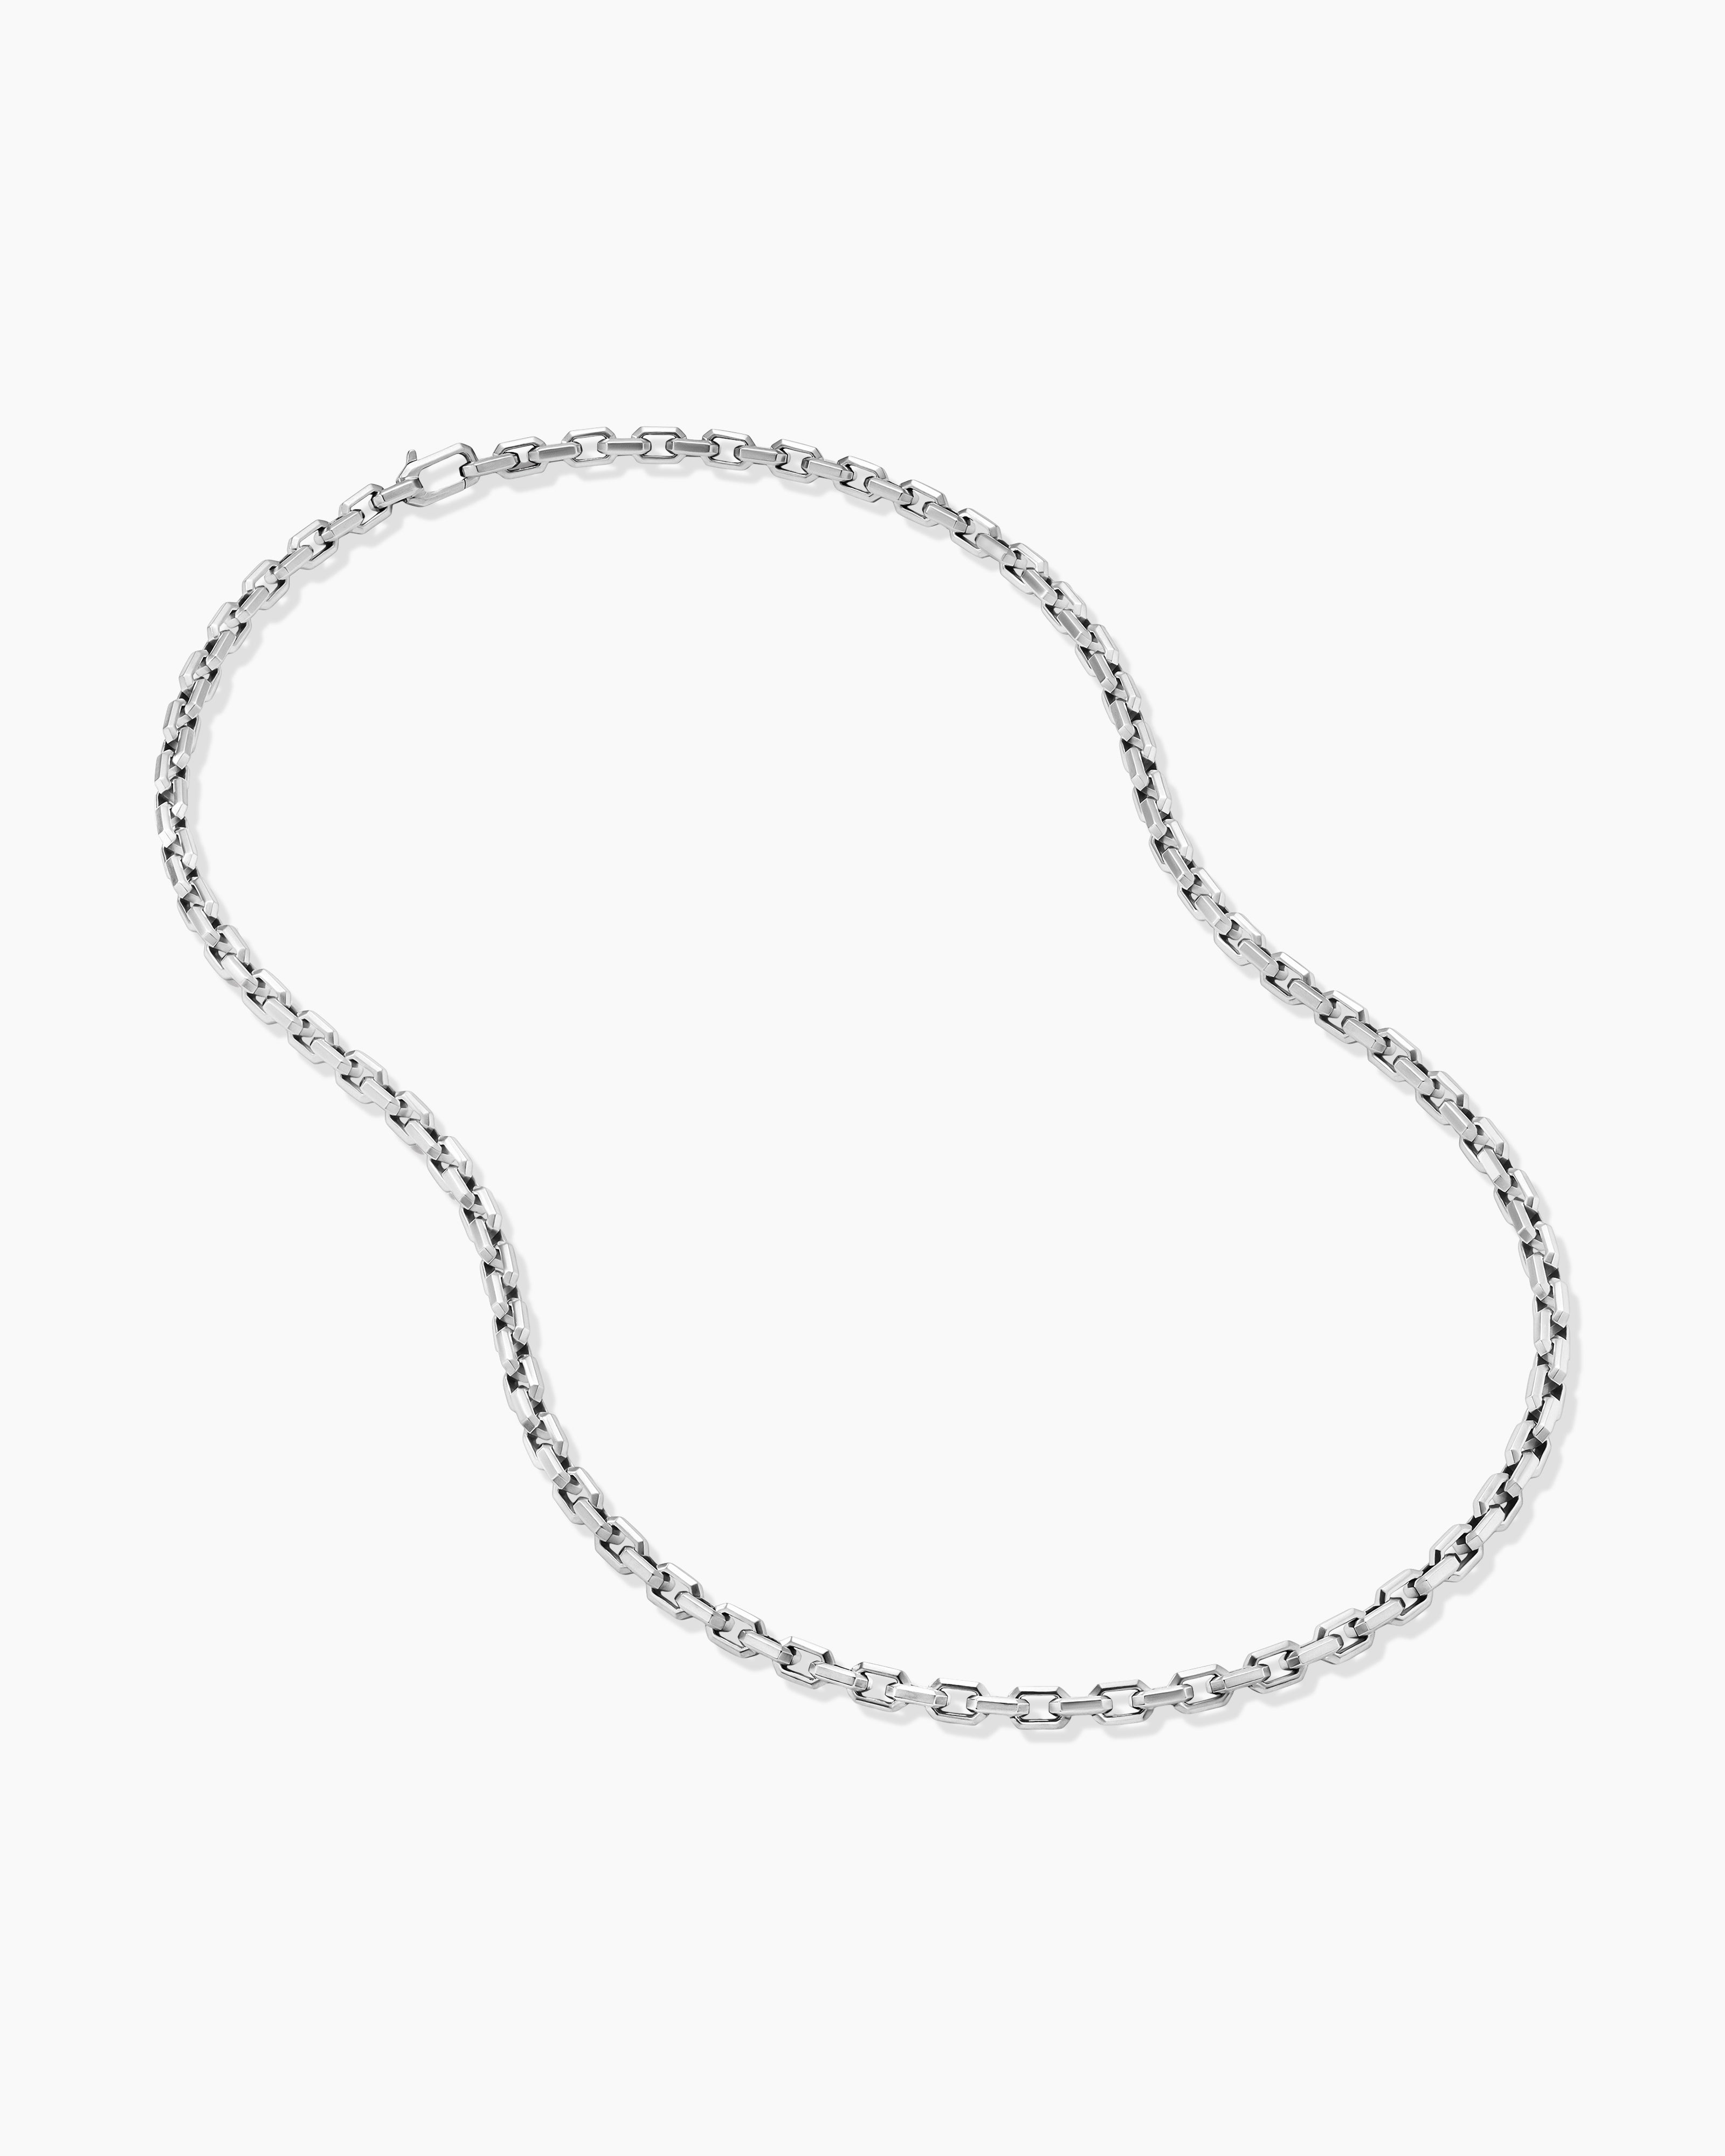 Streamline® Heirloom Chain Link Necklace in Sterling Silver, 5.5mm